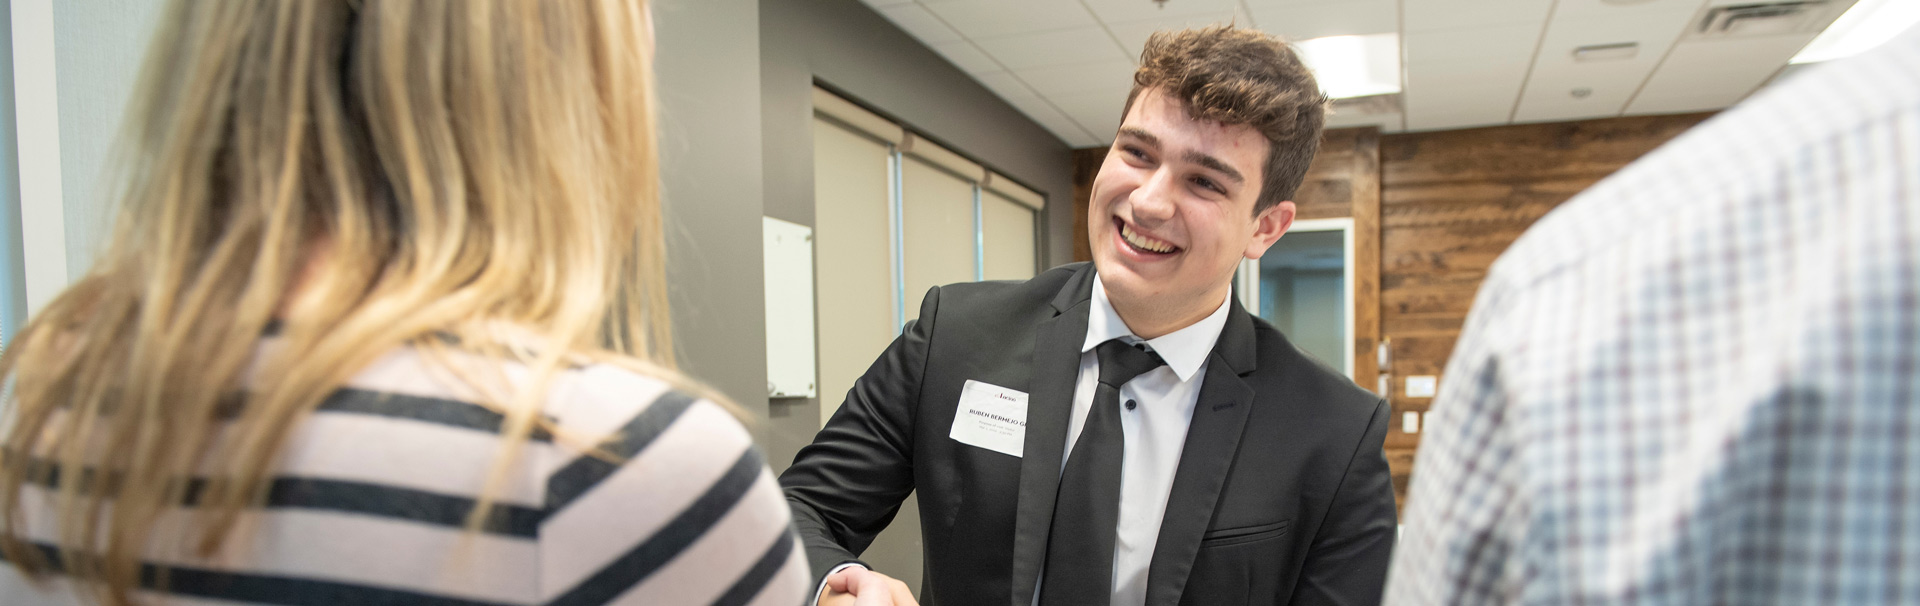  A student shakes hands with prospective employers at a job fair